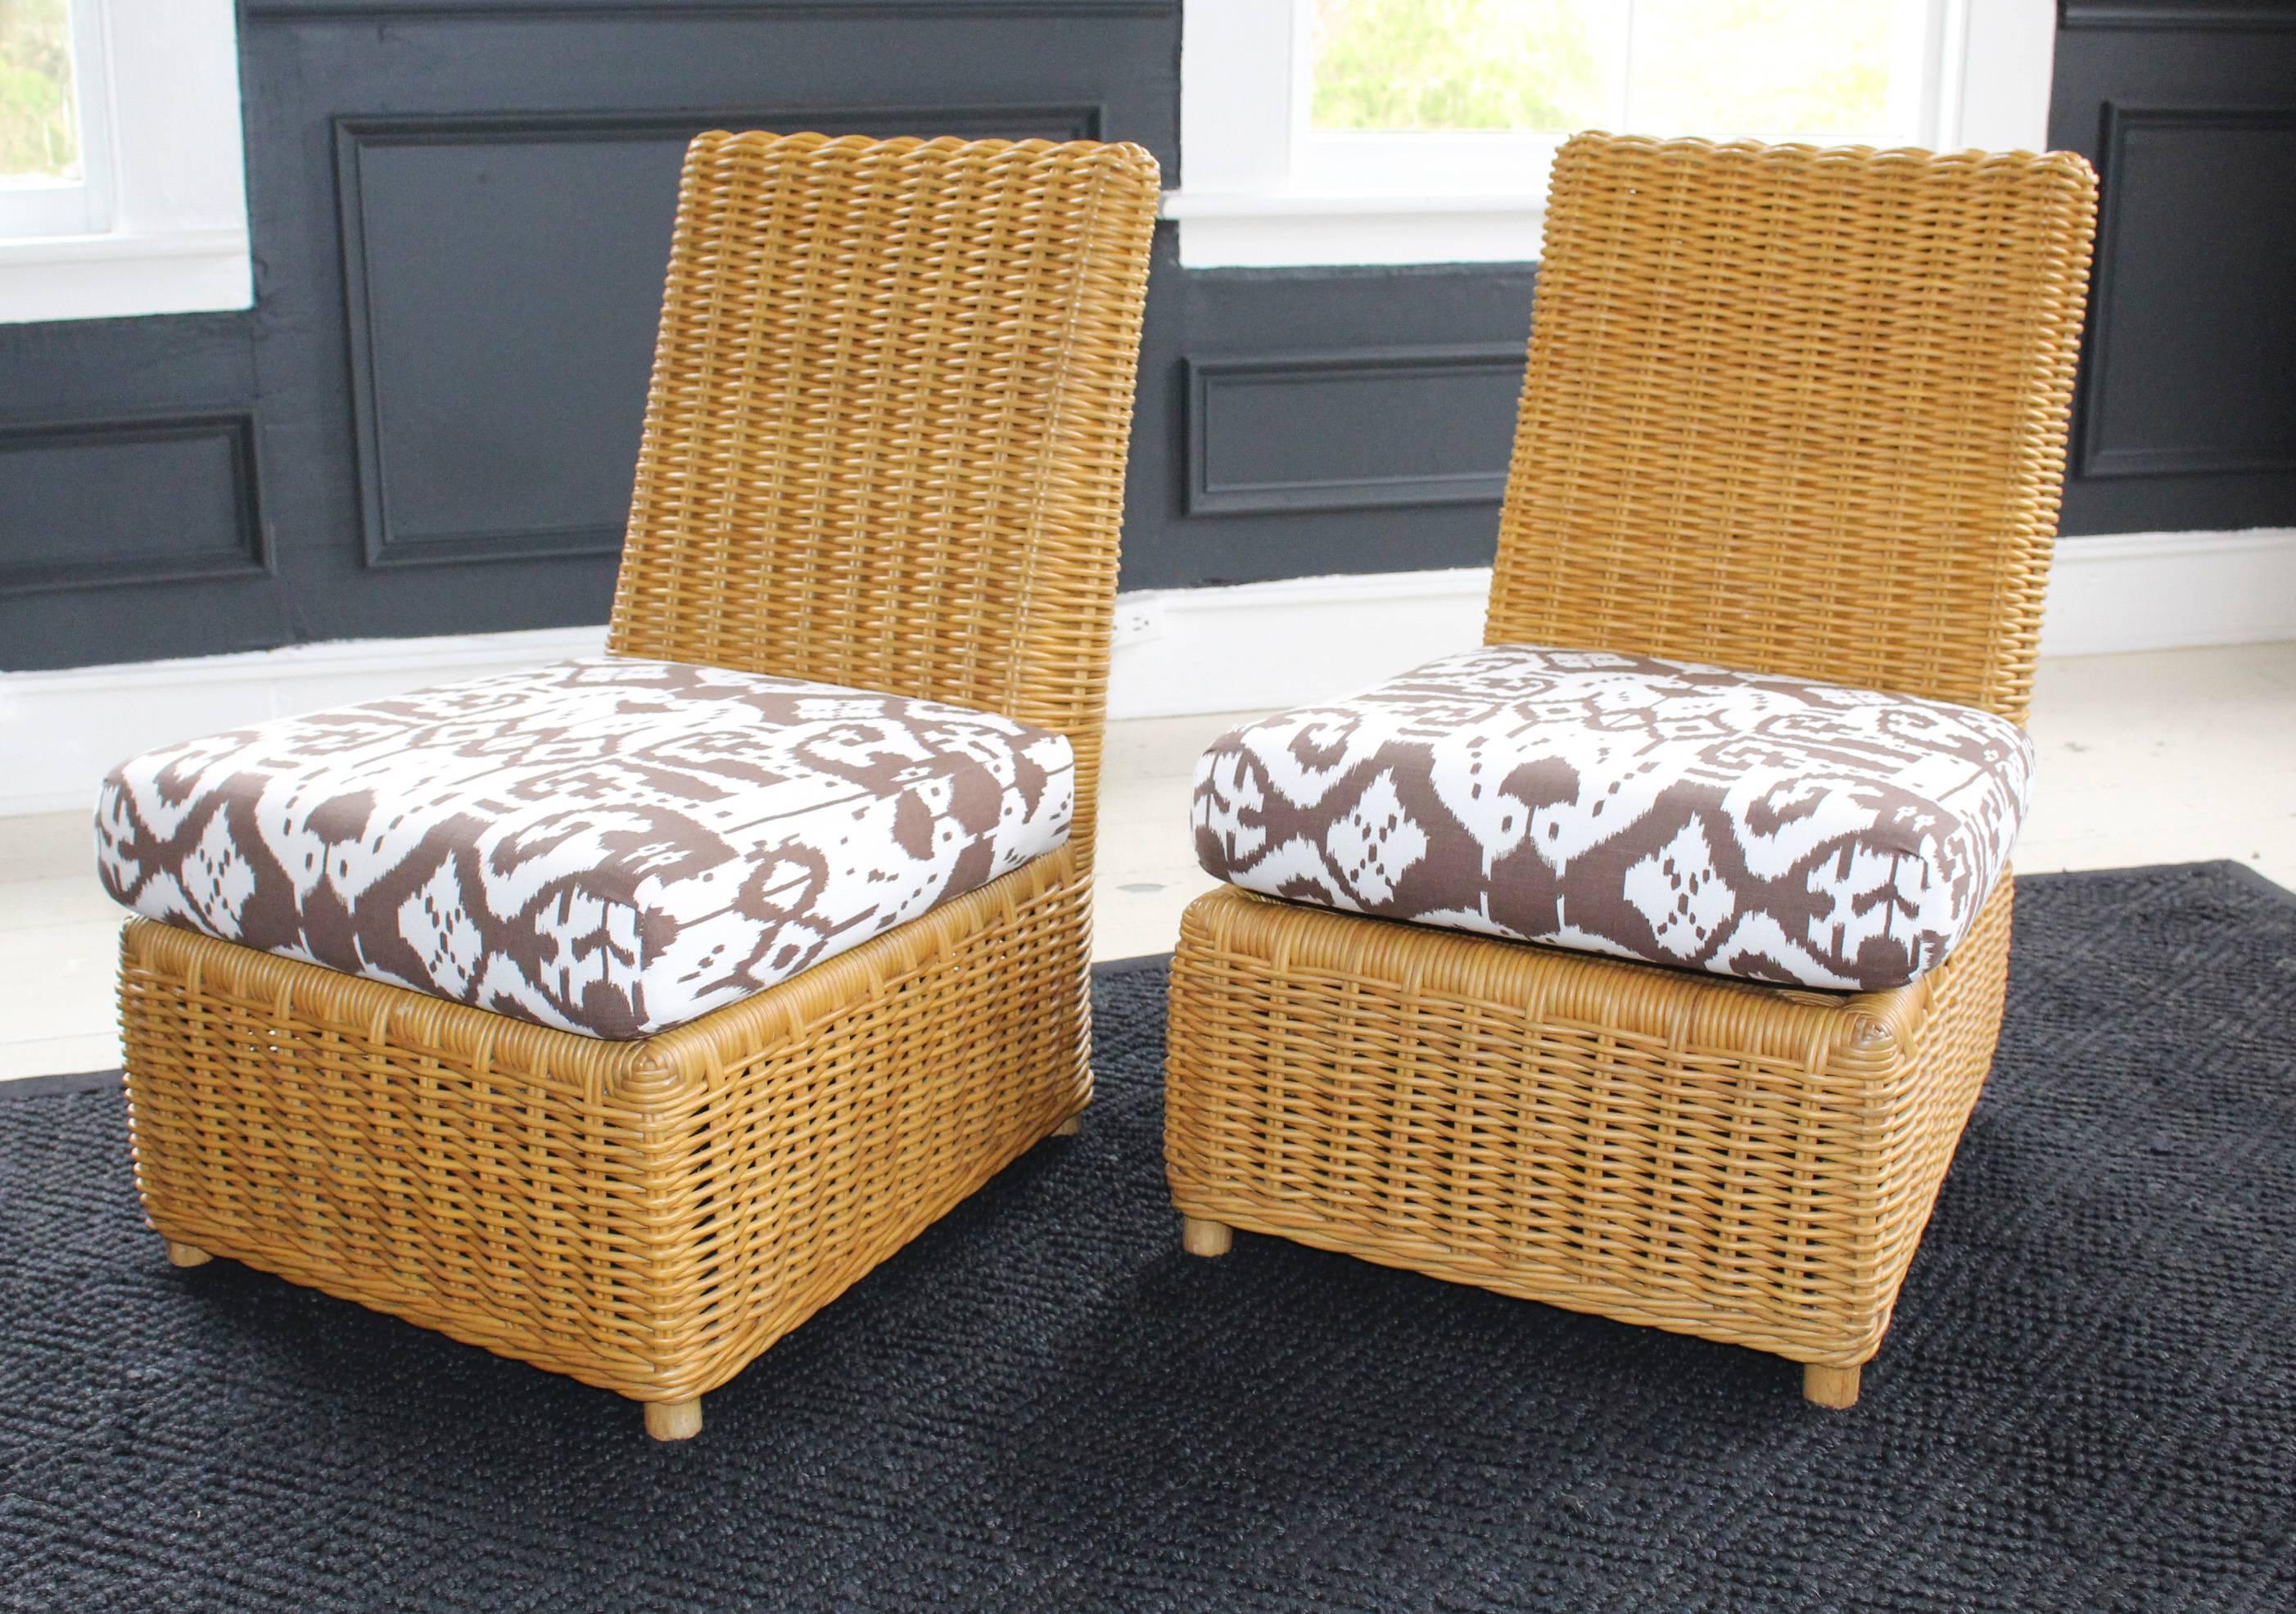 Pair of 1980s Angelo Donghia wicker slipper chairs with matching ottoman, each with seat cushions newly upholstered in brown/white Ikat.

Slipper chair measurements listed below.
Ottoman measurements: 22